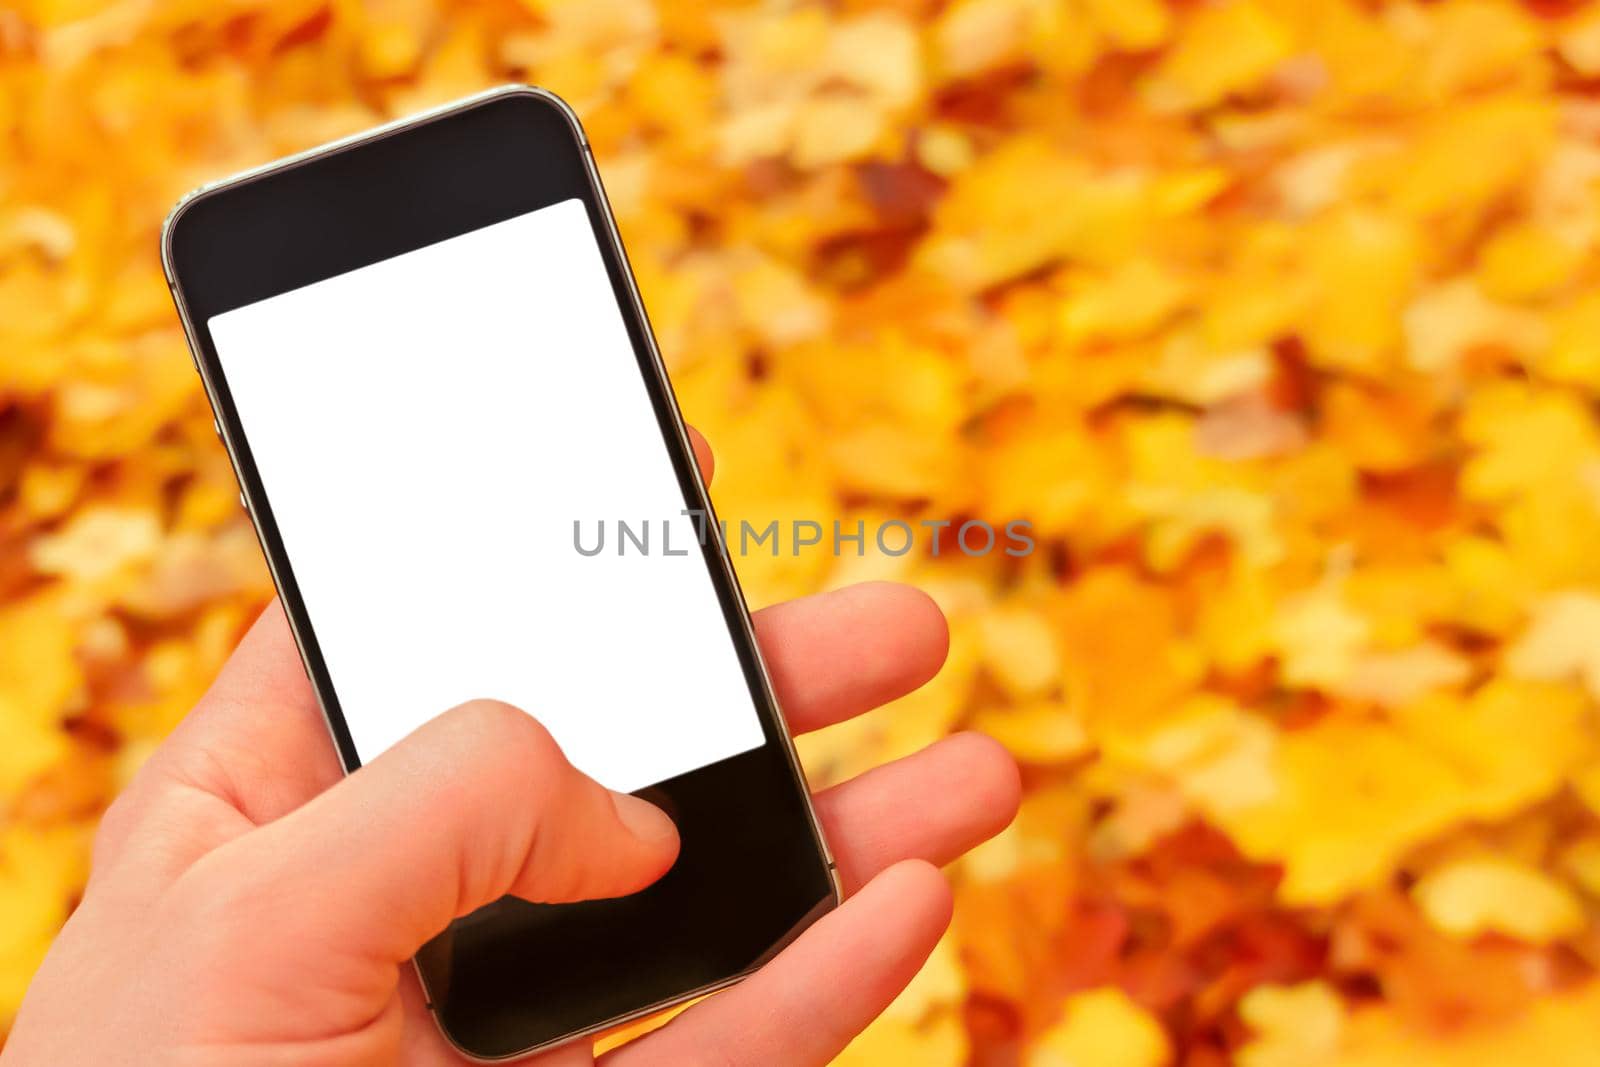 Fallen leaves autumn background fall nature. Autumn mobile phone mockup hand holding smartphone nature phone screen mockup smartphone blank screen hand phone blur background leaves falling sale mobile